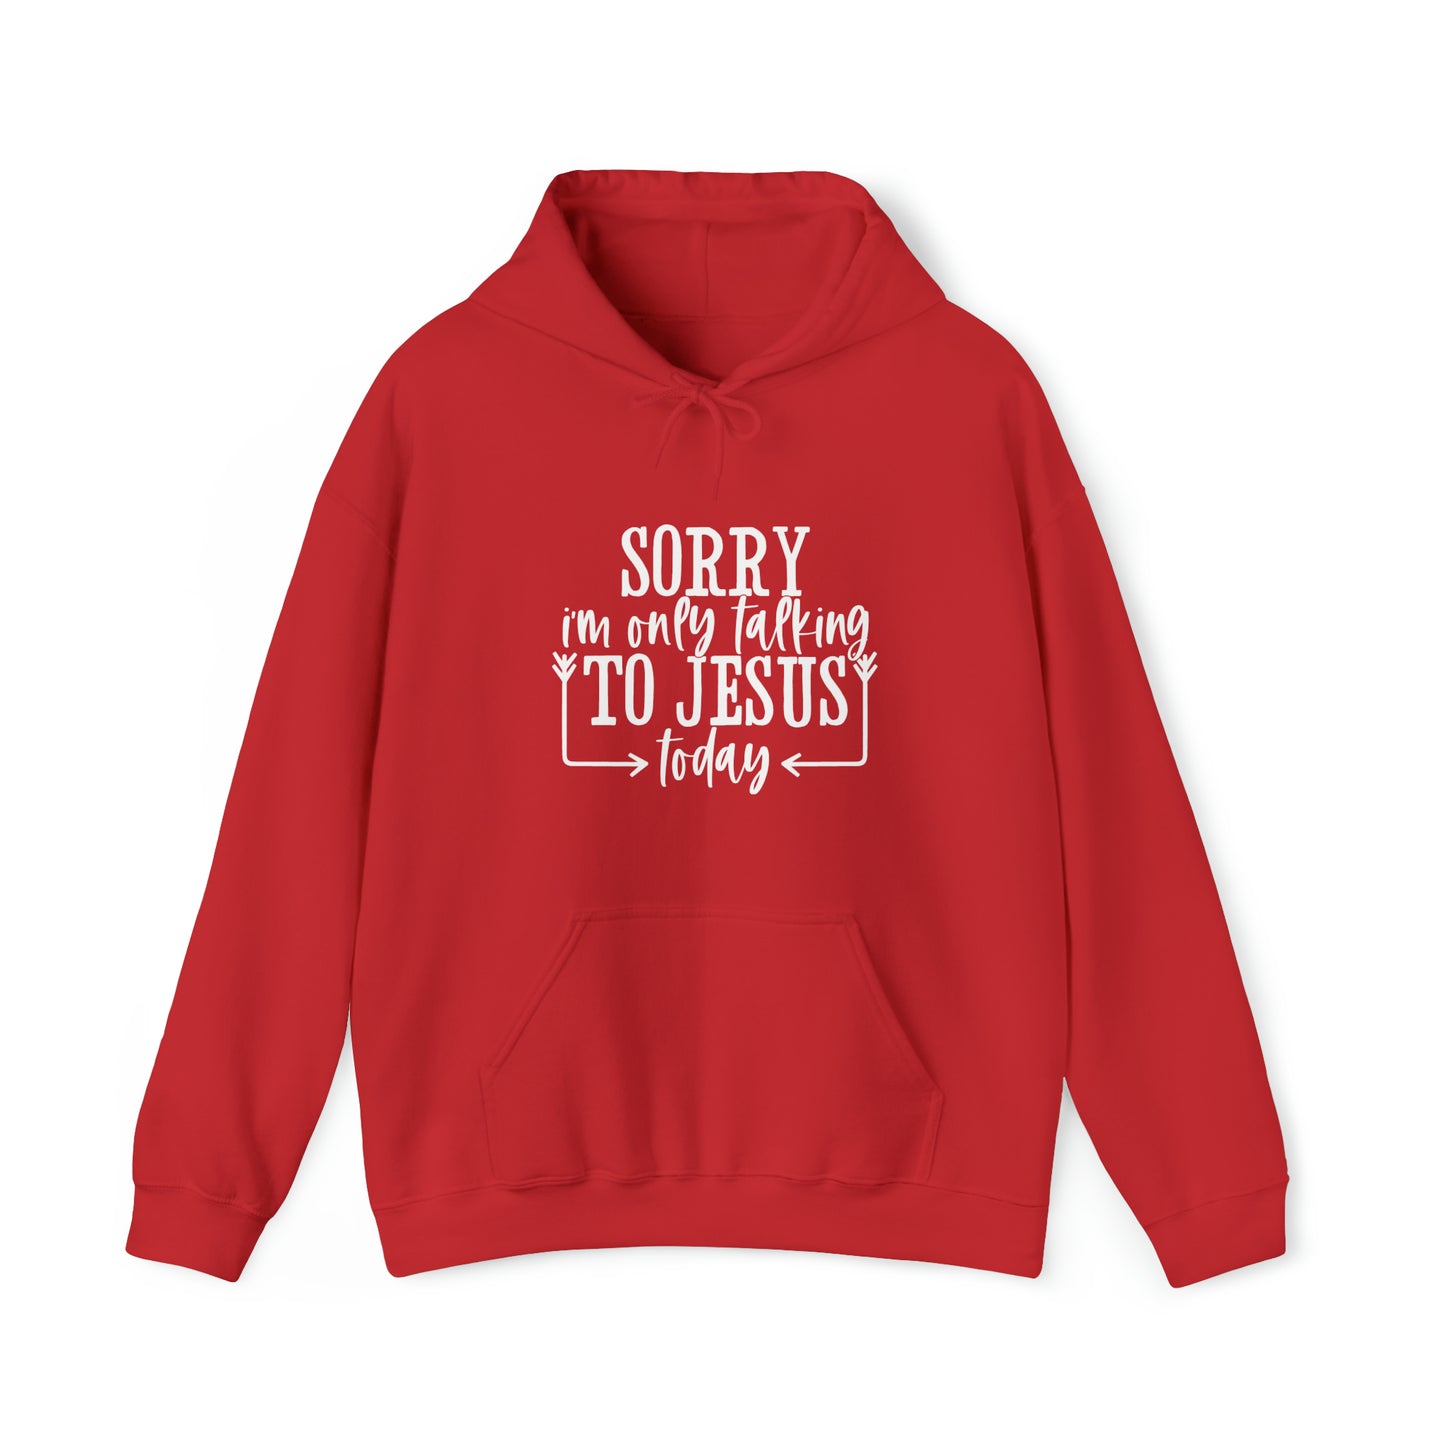 Only Talking To Jesus Today Unisex Heavy Blend™ Hooded Sweatshirt